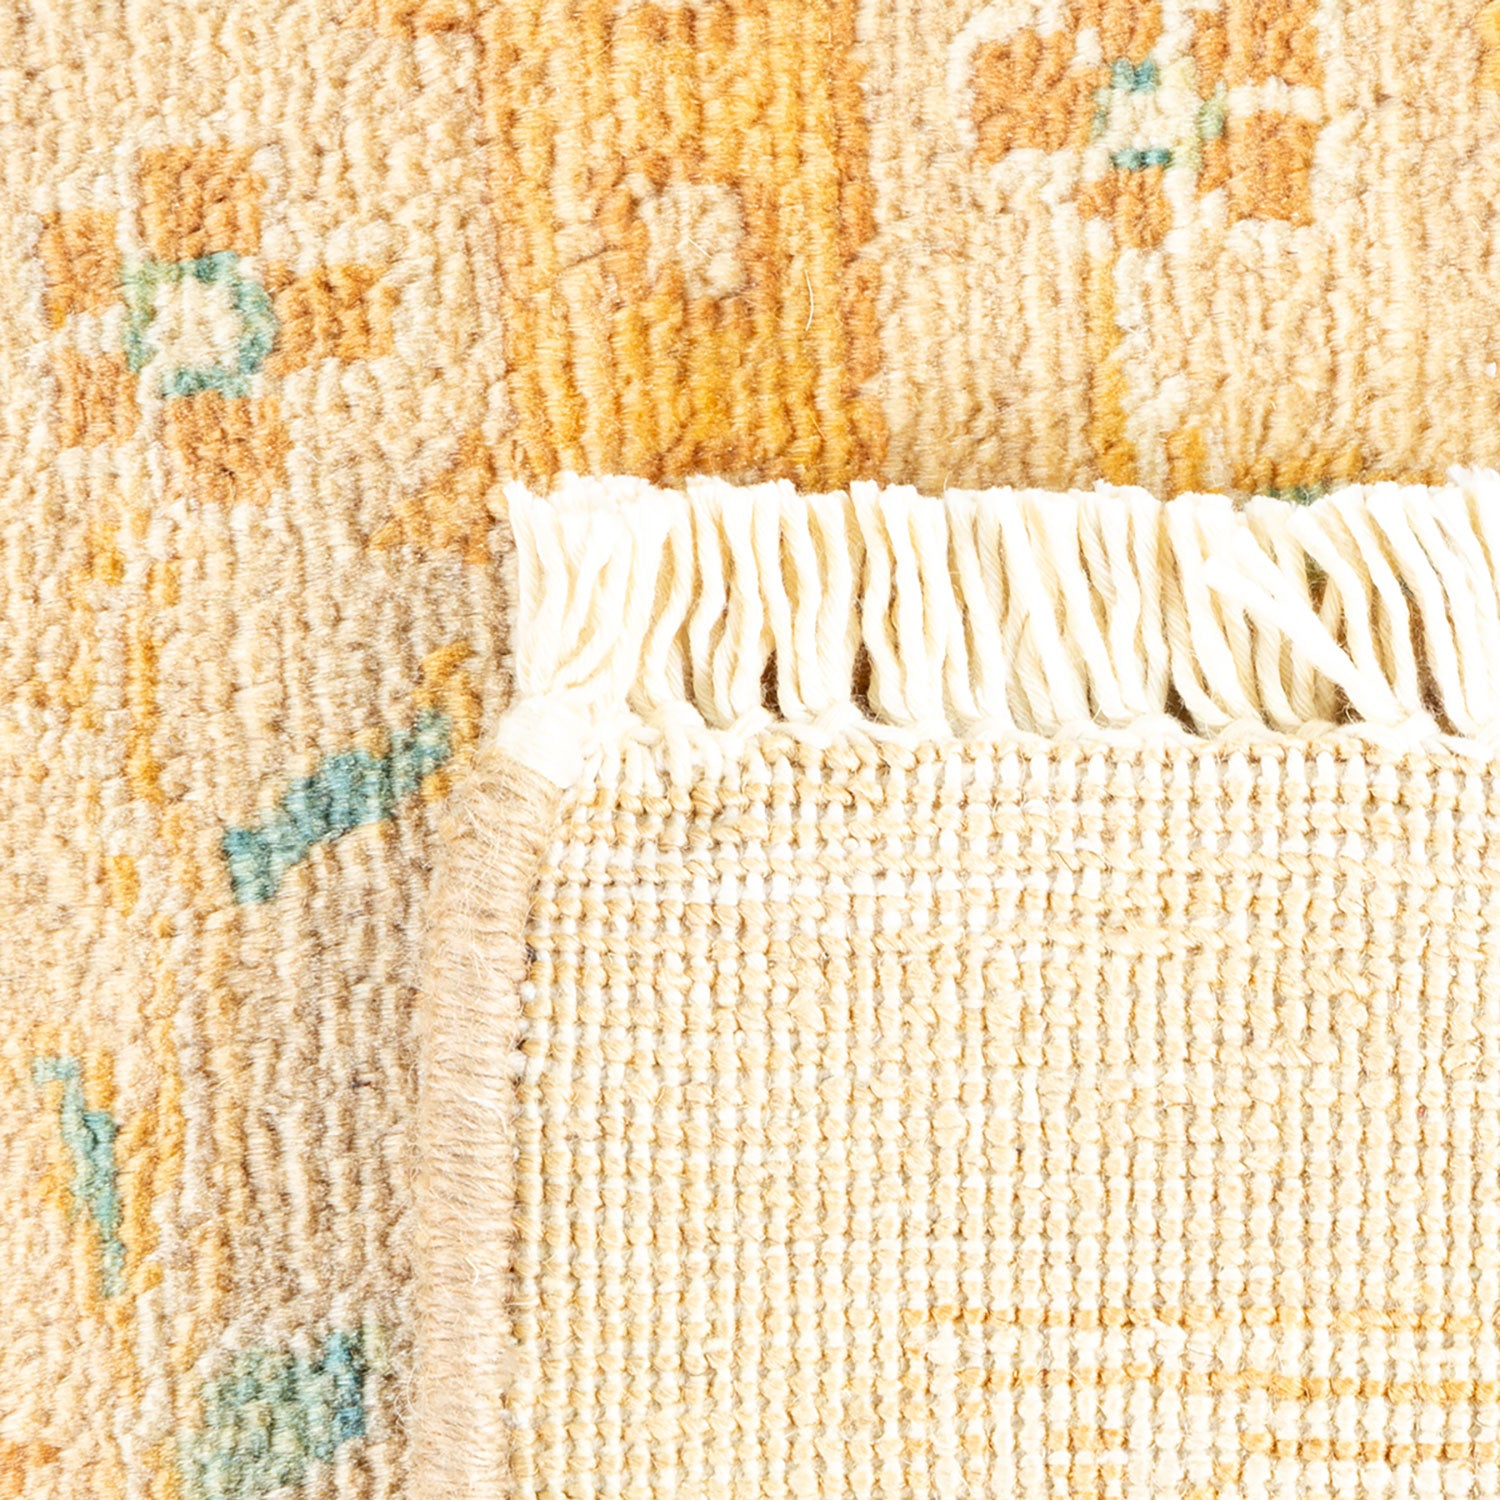 Close-up of a handcrafted rug with golden yellow and teal pattern